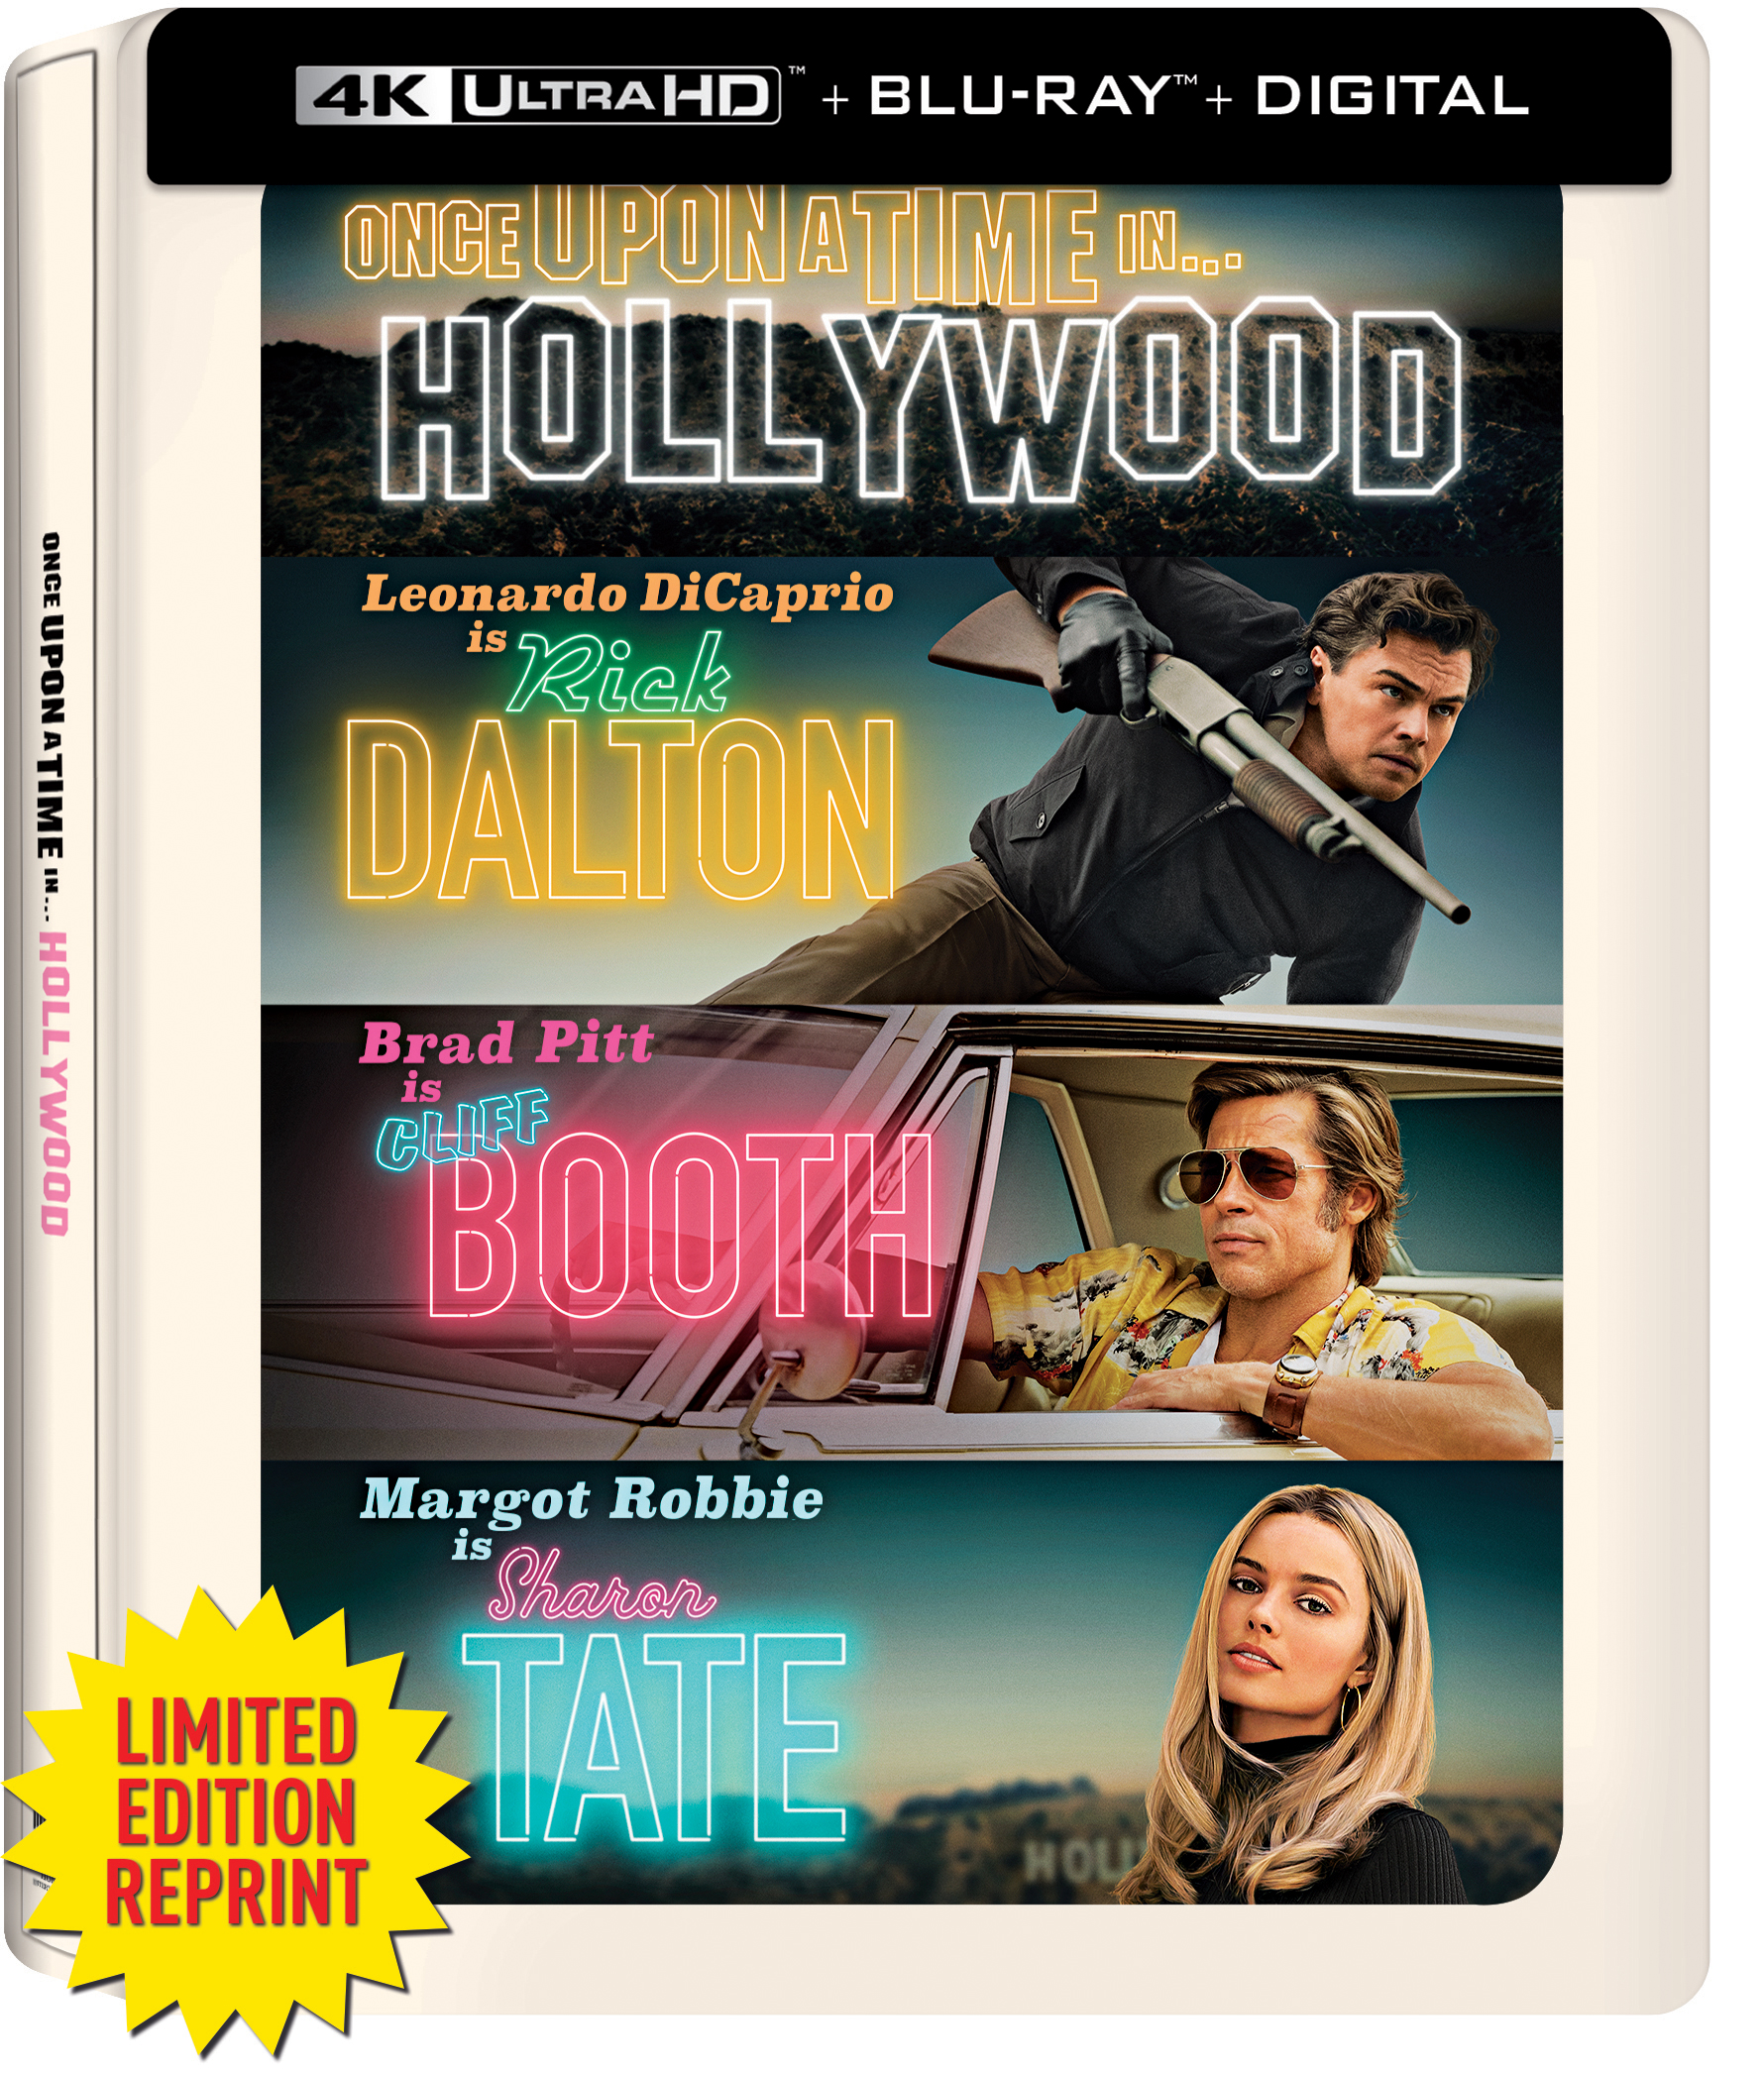 

Once Upon a Time in Hollywood [Limited Edition] [SteelBook] [Dig Copy] [4K Ultra HD Blu/Blu-ray] [2019]